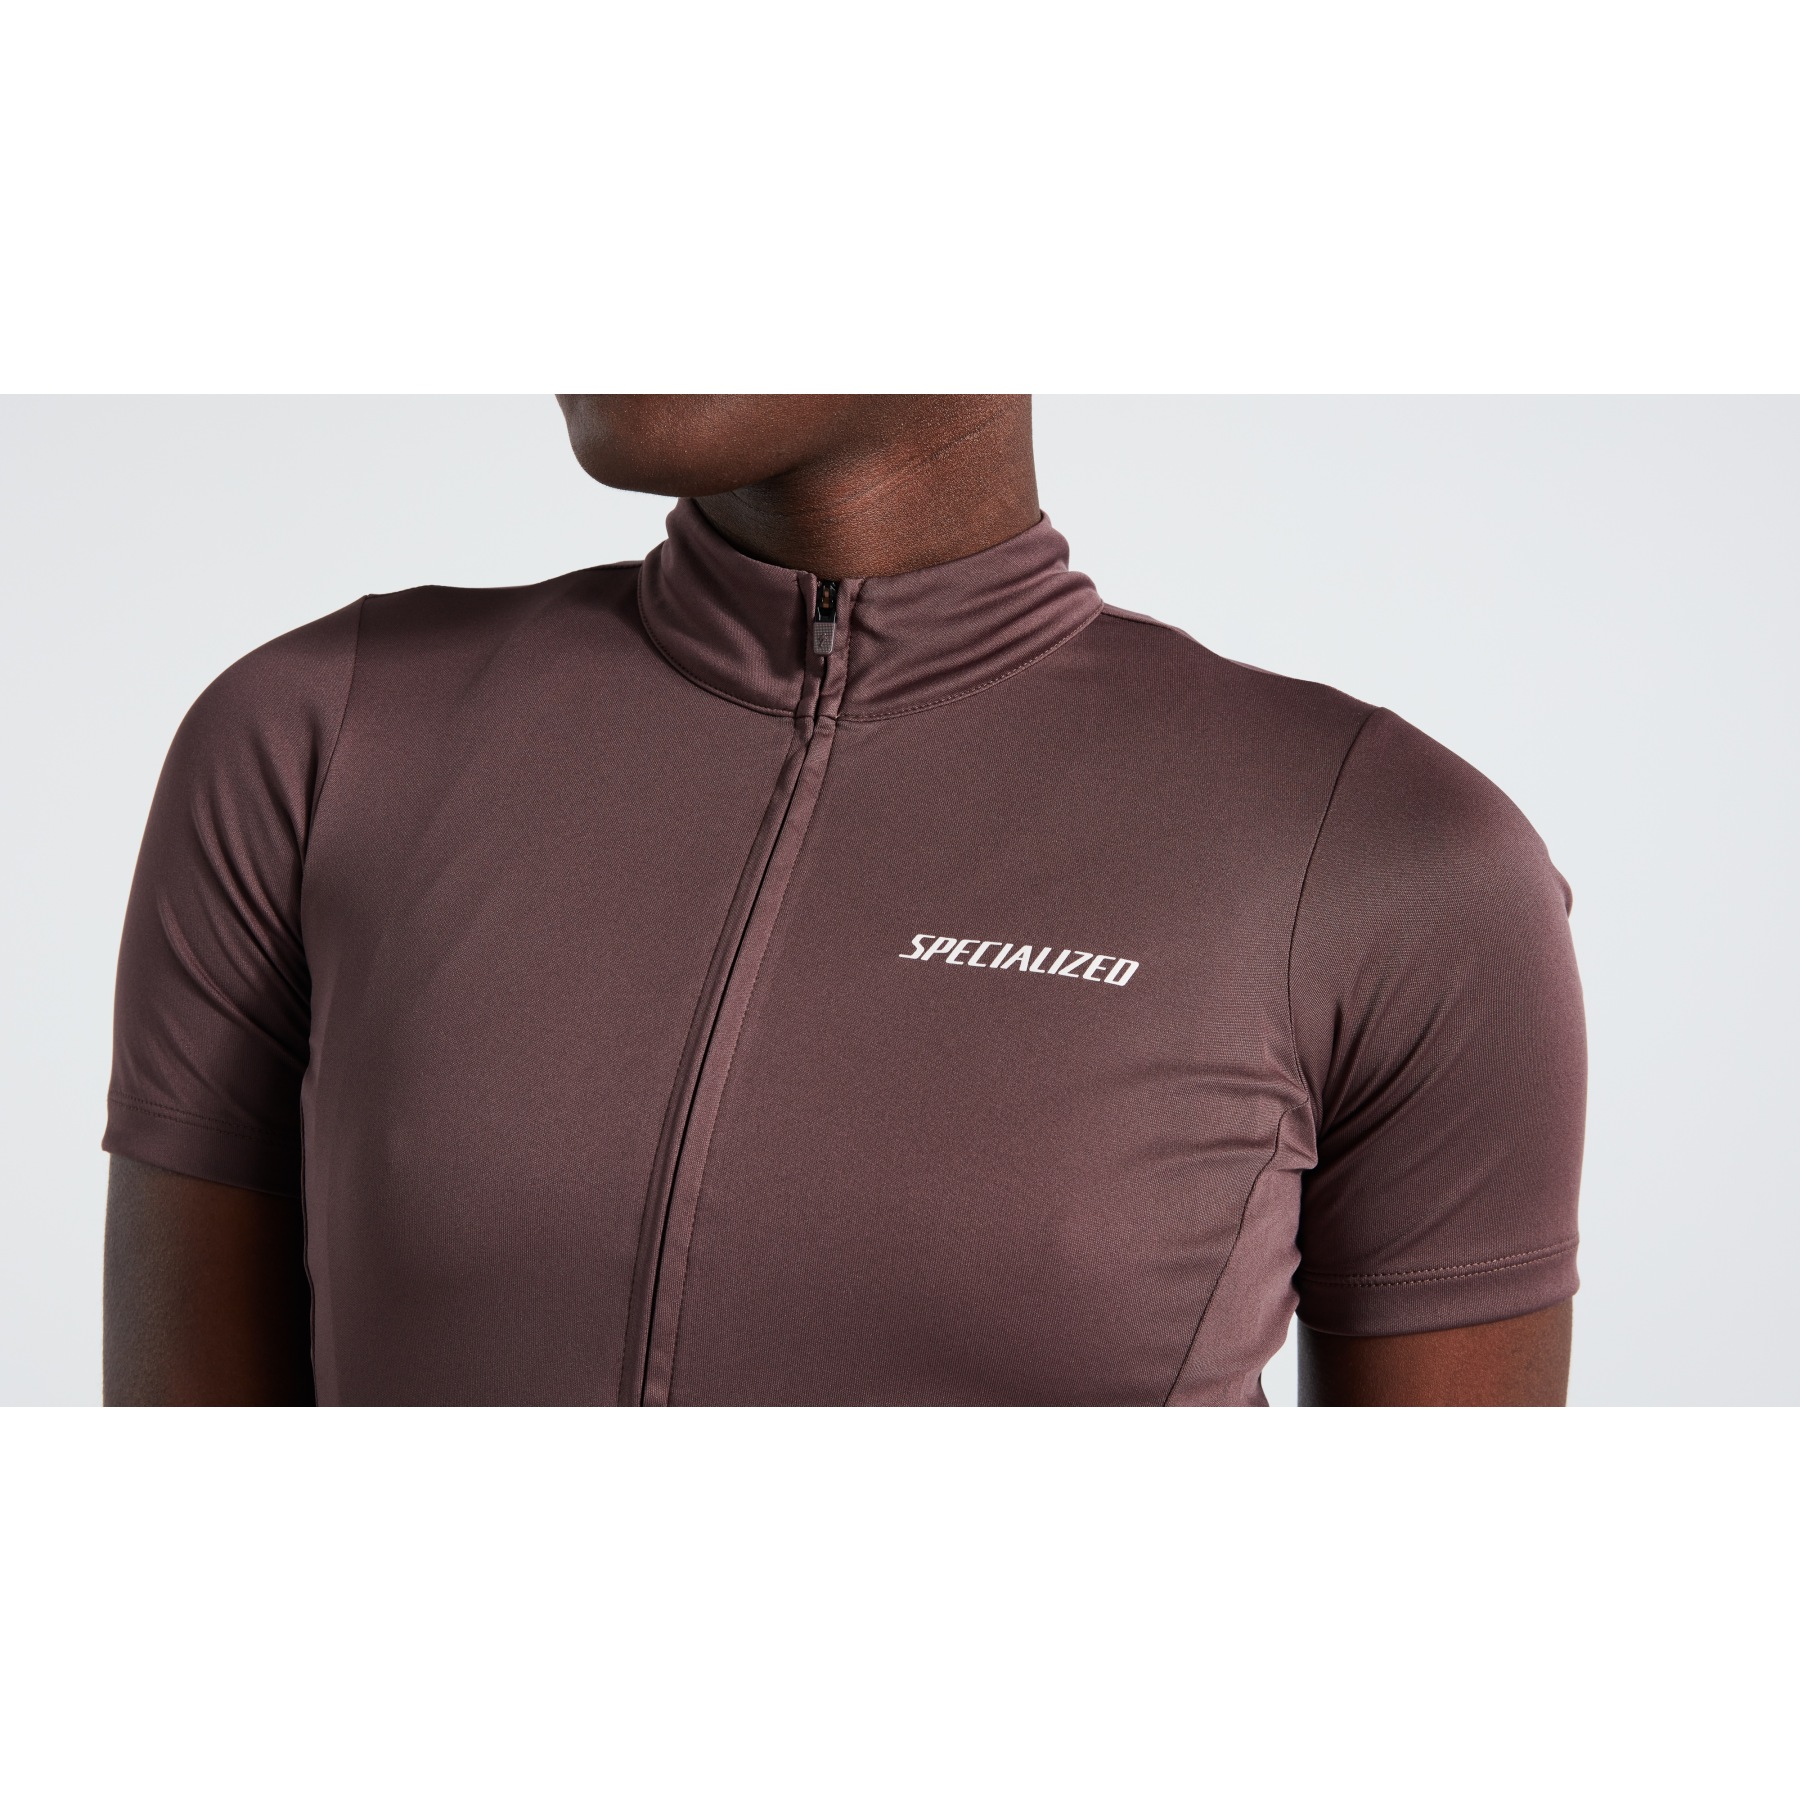 RBX CLASSIC JERSEY LS - CAMISA CICLISMO SPECIALIZED RBX CLASSIC